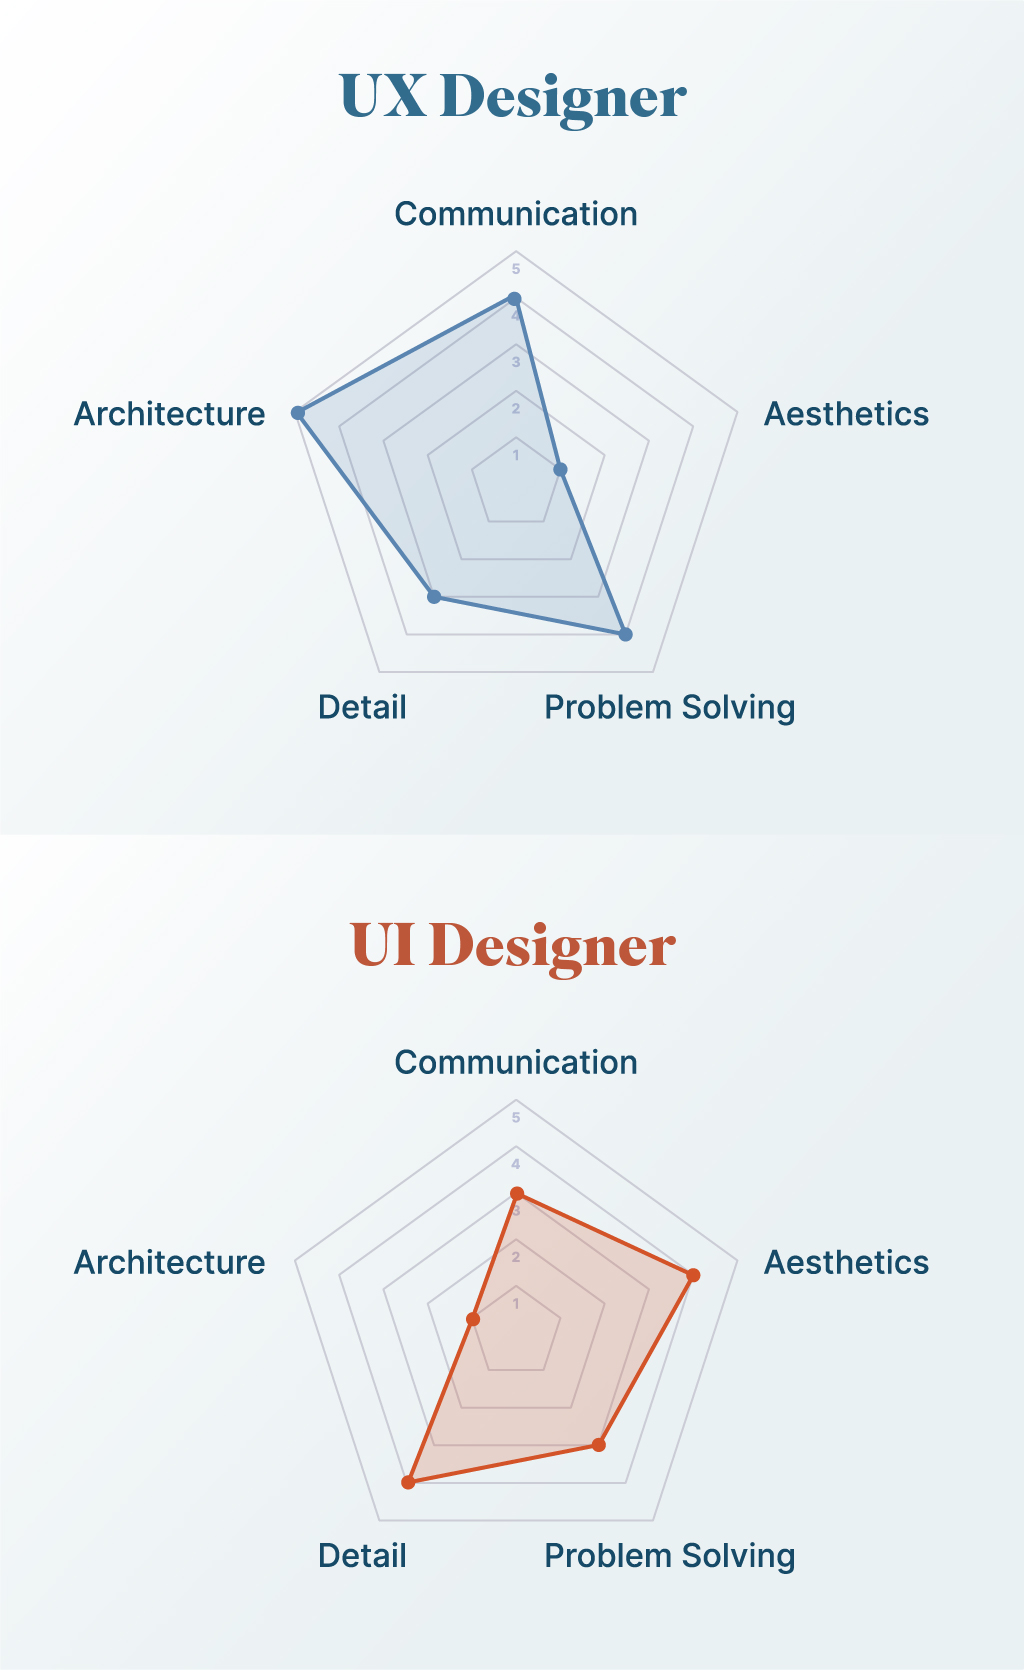 :mobile: The qualities and skills of UX Designers is compared to those of UI designers using a 5 point graph.